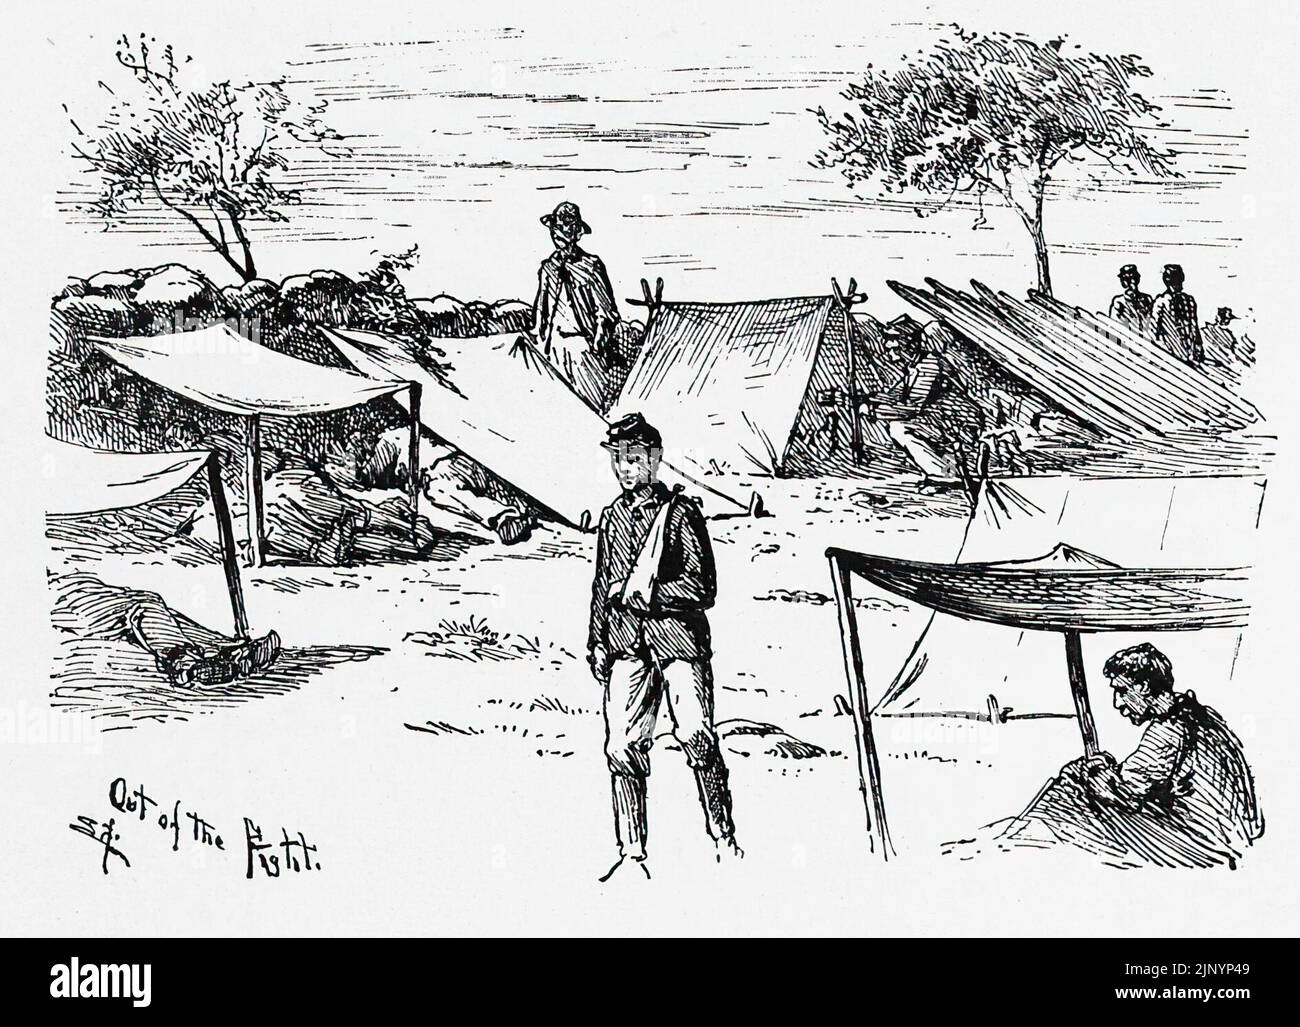 Out of the Fight. Union Army field hospital. 19th century American Civil War illustration by Edwin Forbes Stock Photo